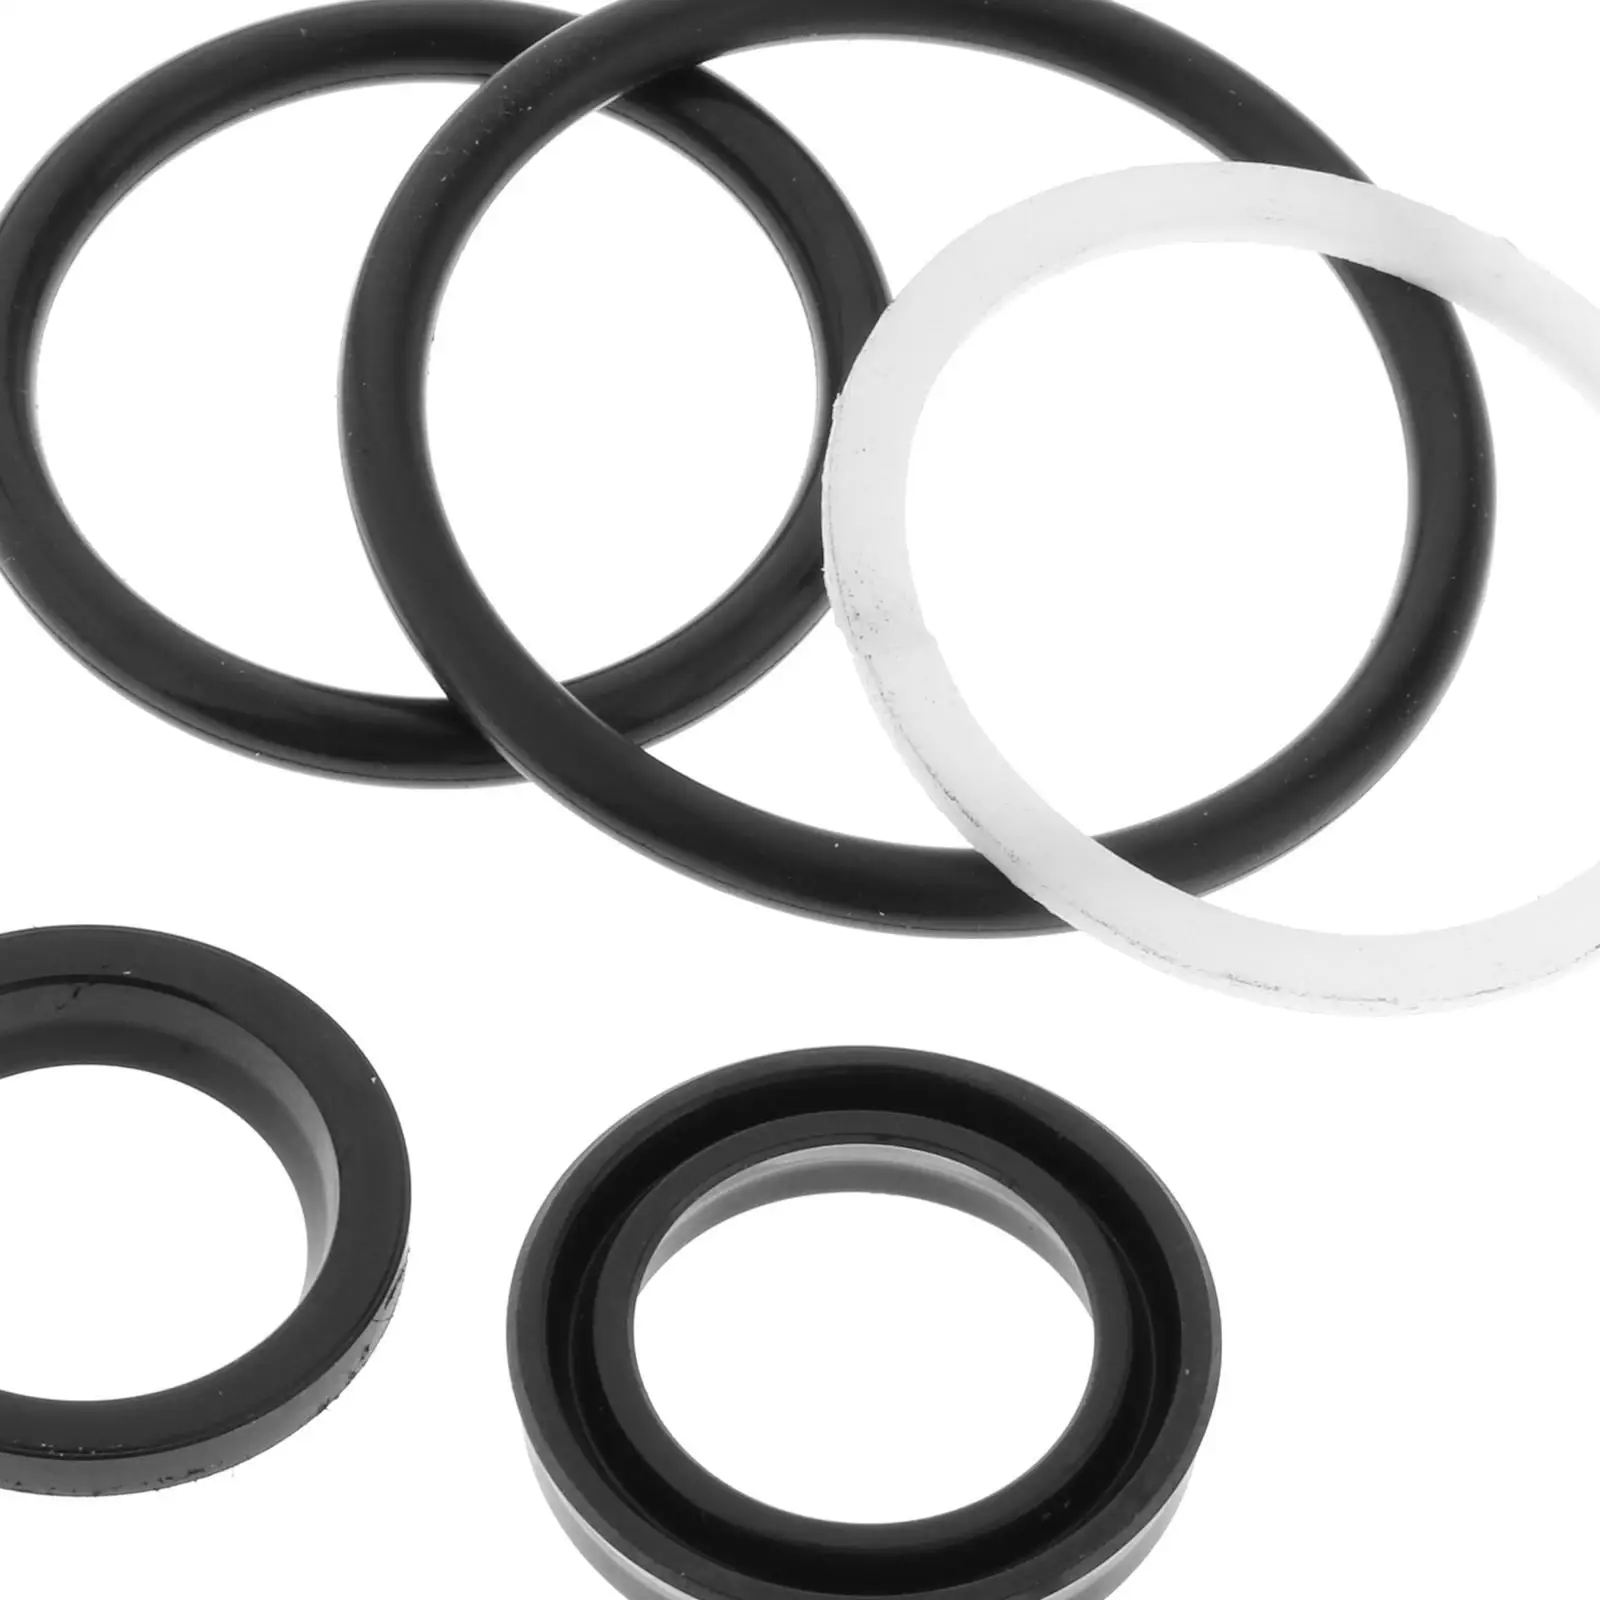 Seal and O Ring Screw Kit Seal 64E-43822-00 for Yamaha Outboard Parts